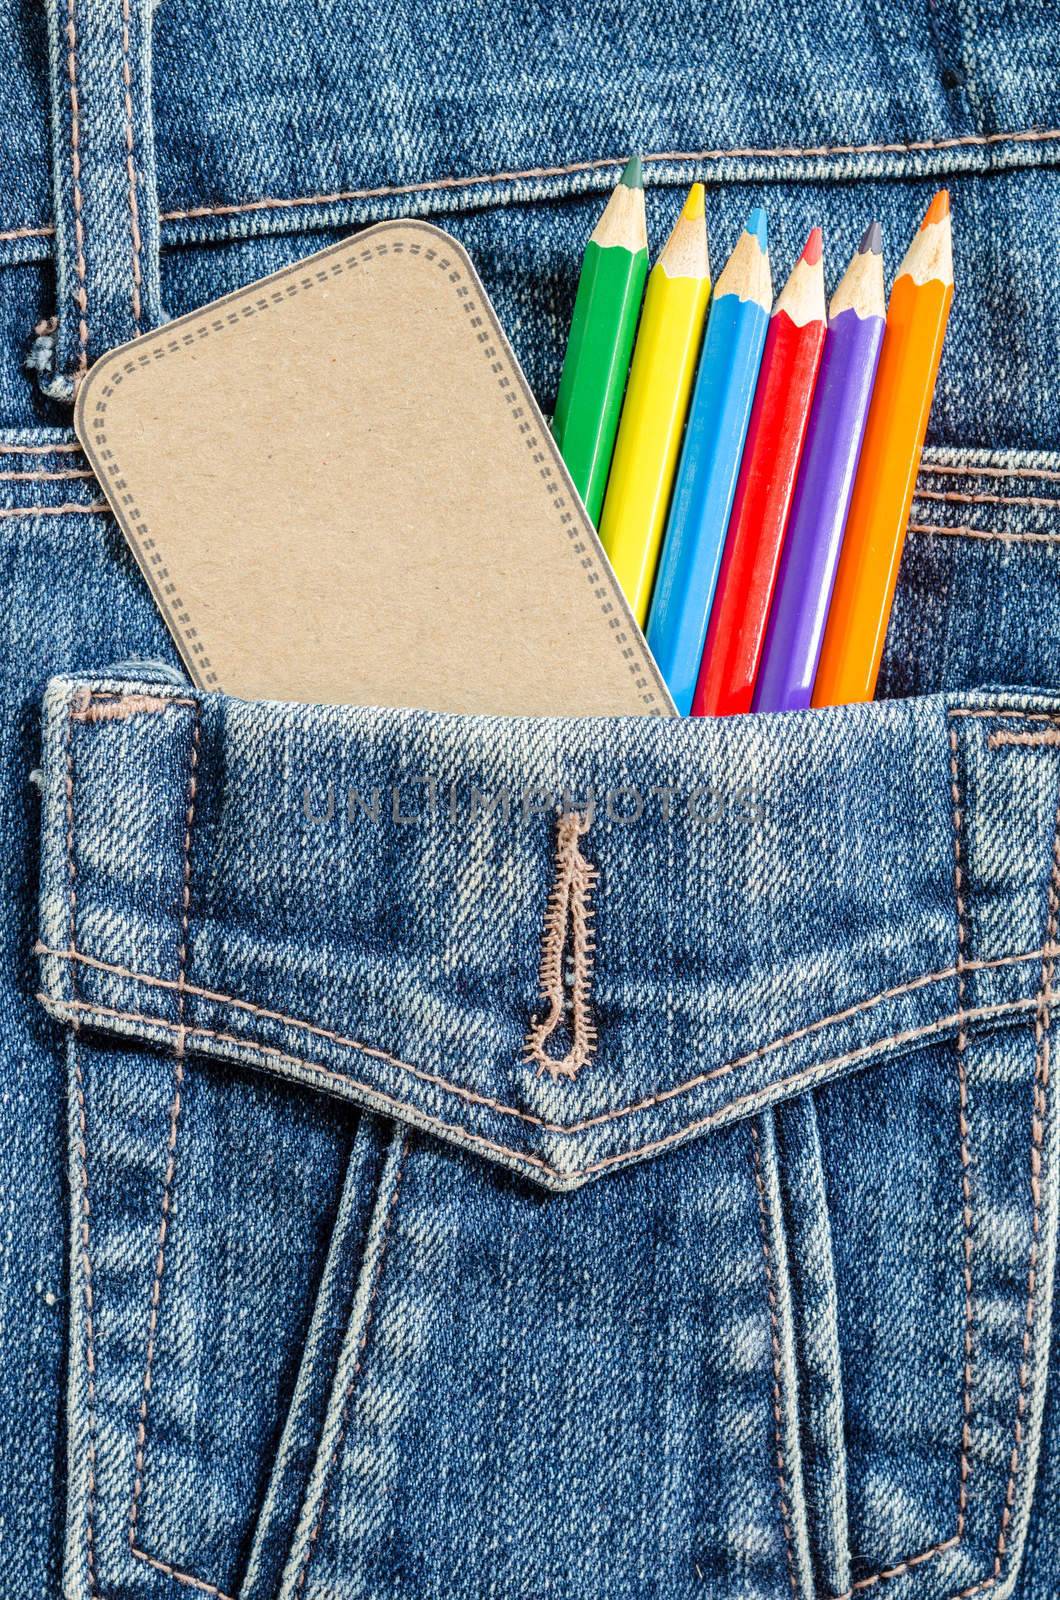 Artist painting concept. Many color pencil and blank brown tag in blue jeans pocket background.